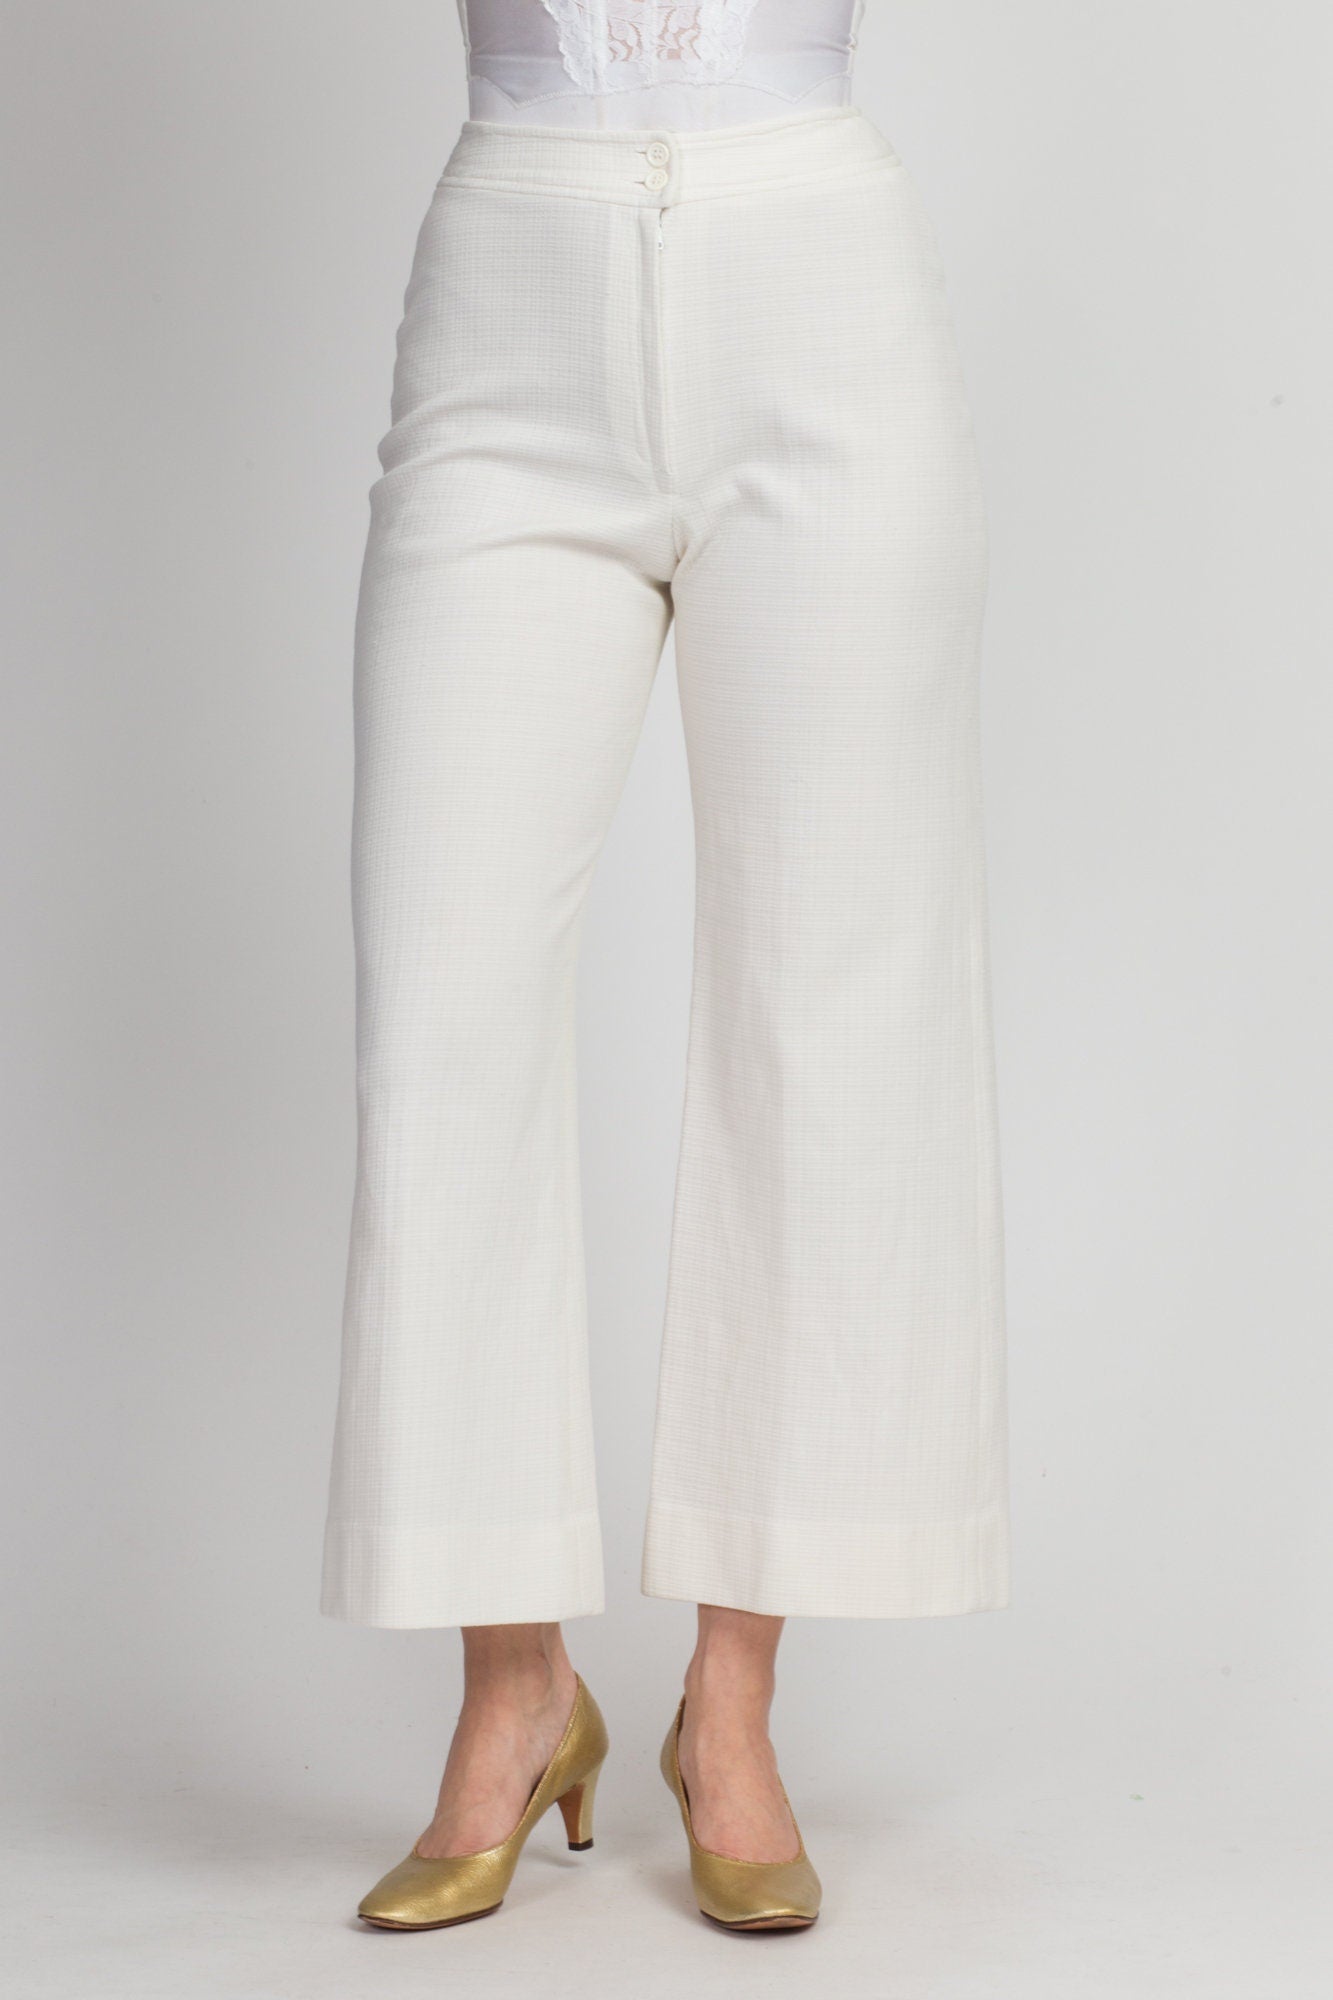 70s Off-White High Waisted Pants - Extra Small, 25